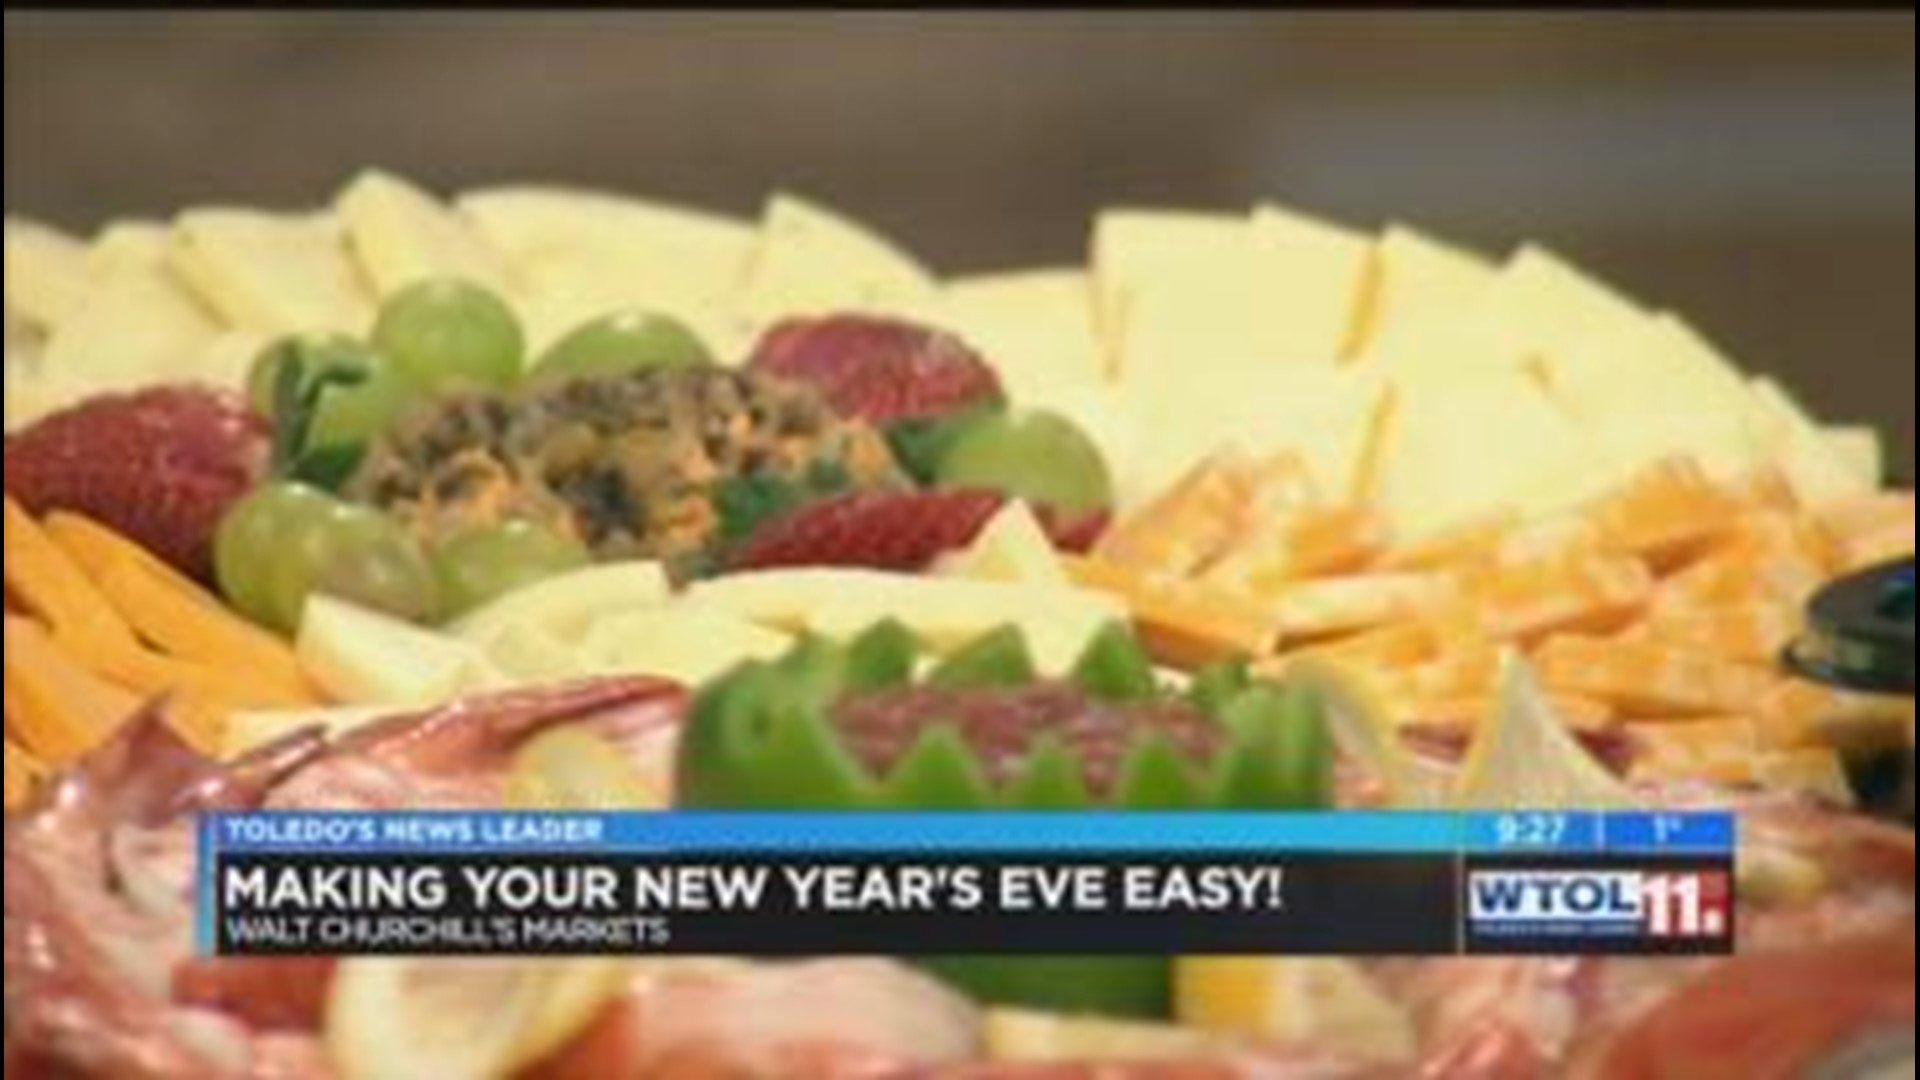 Ring in the New Year with food from Churchill's Market